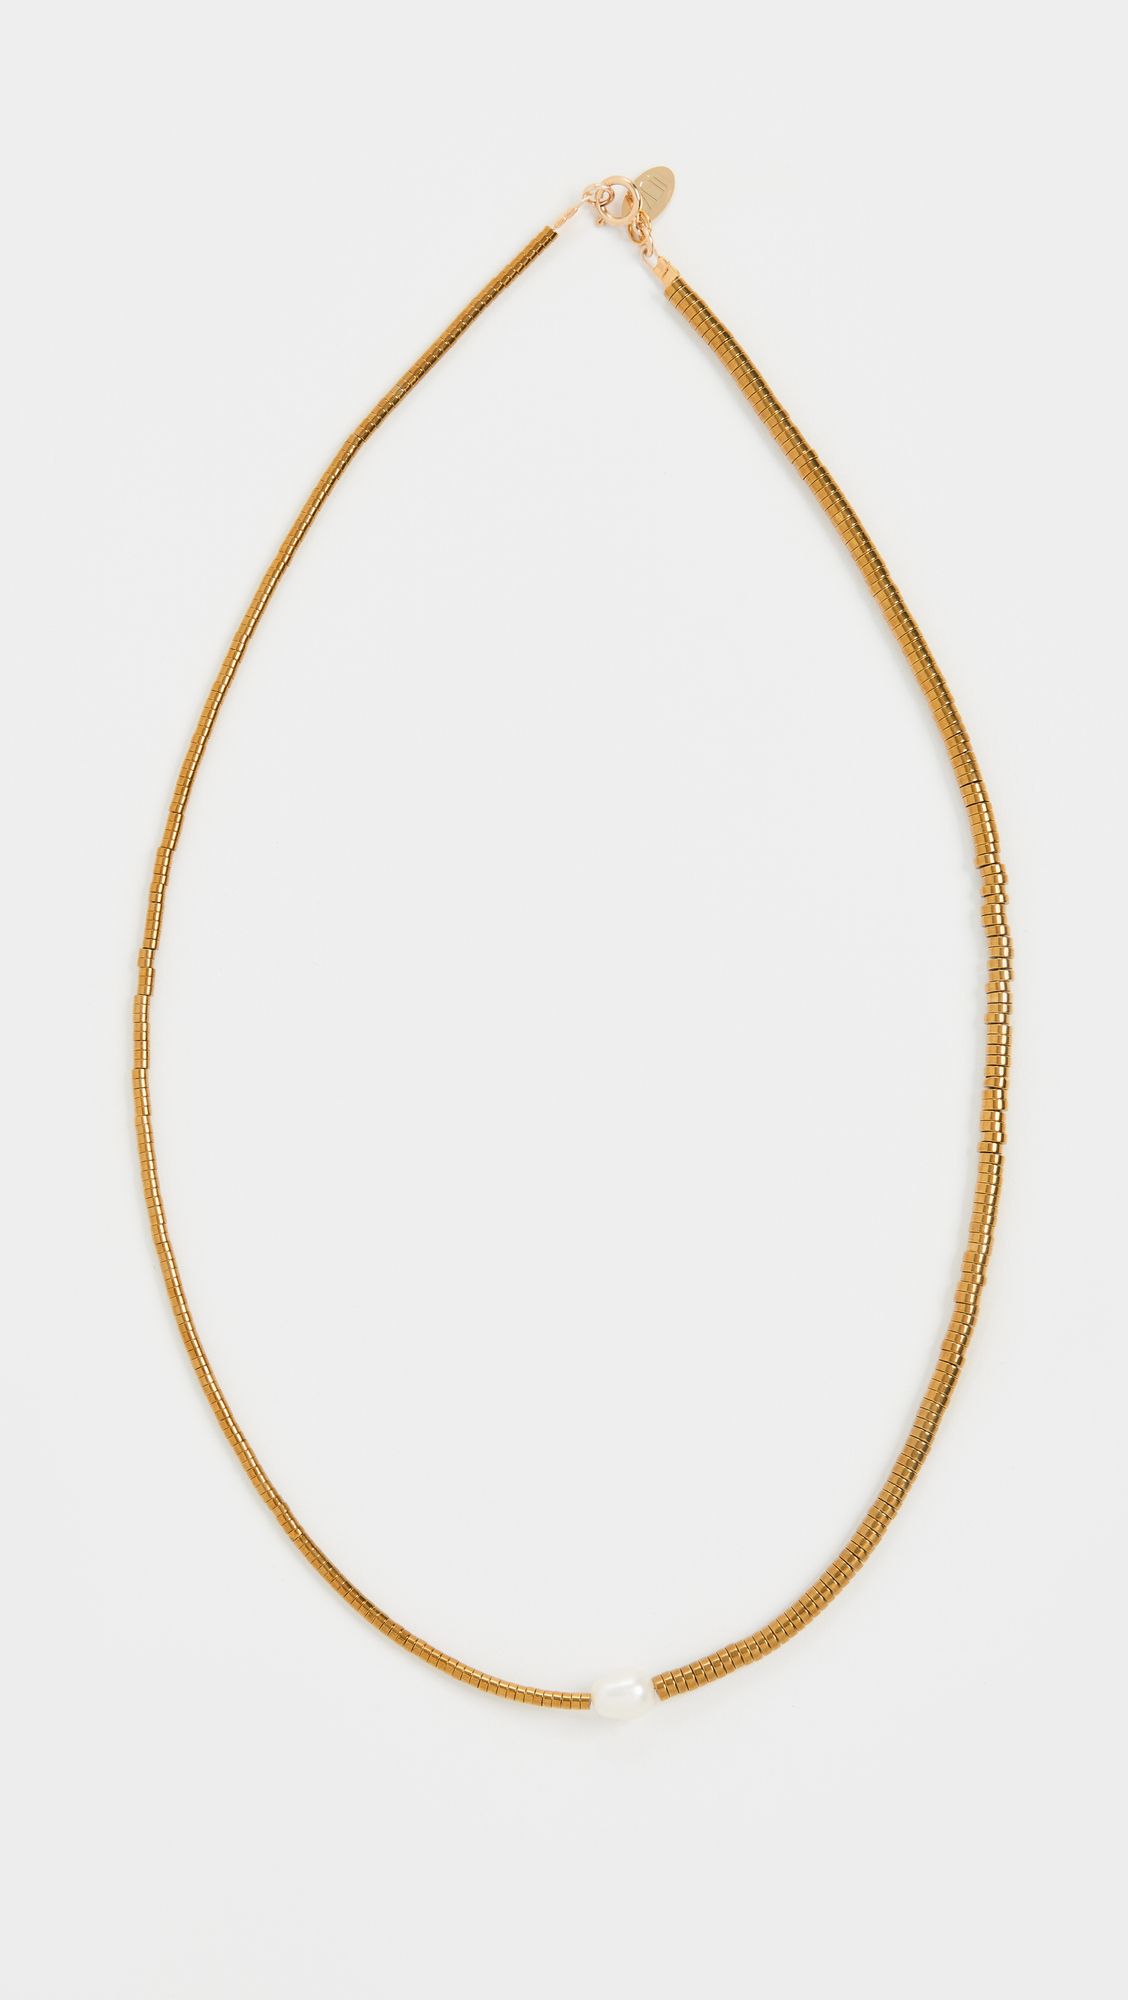 Beaded Necklace | Shopbop